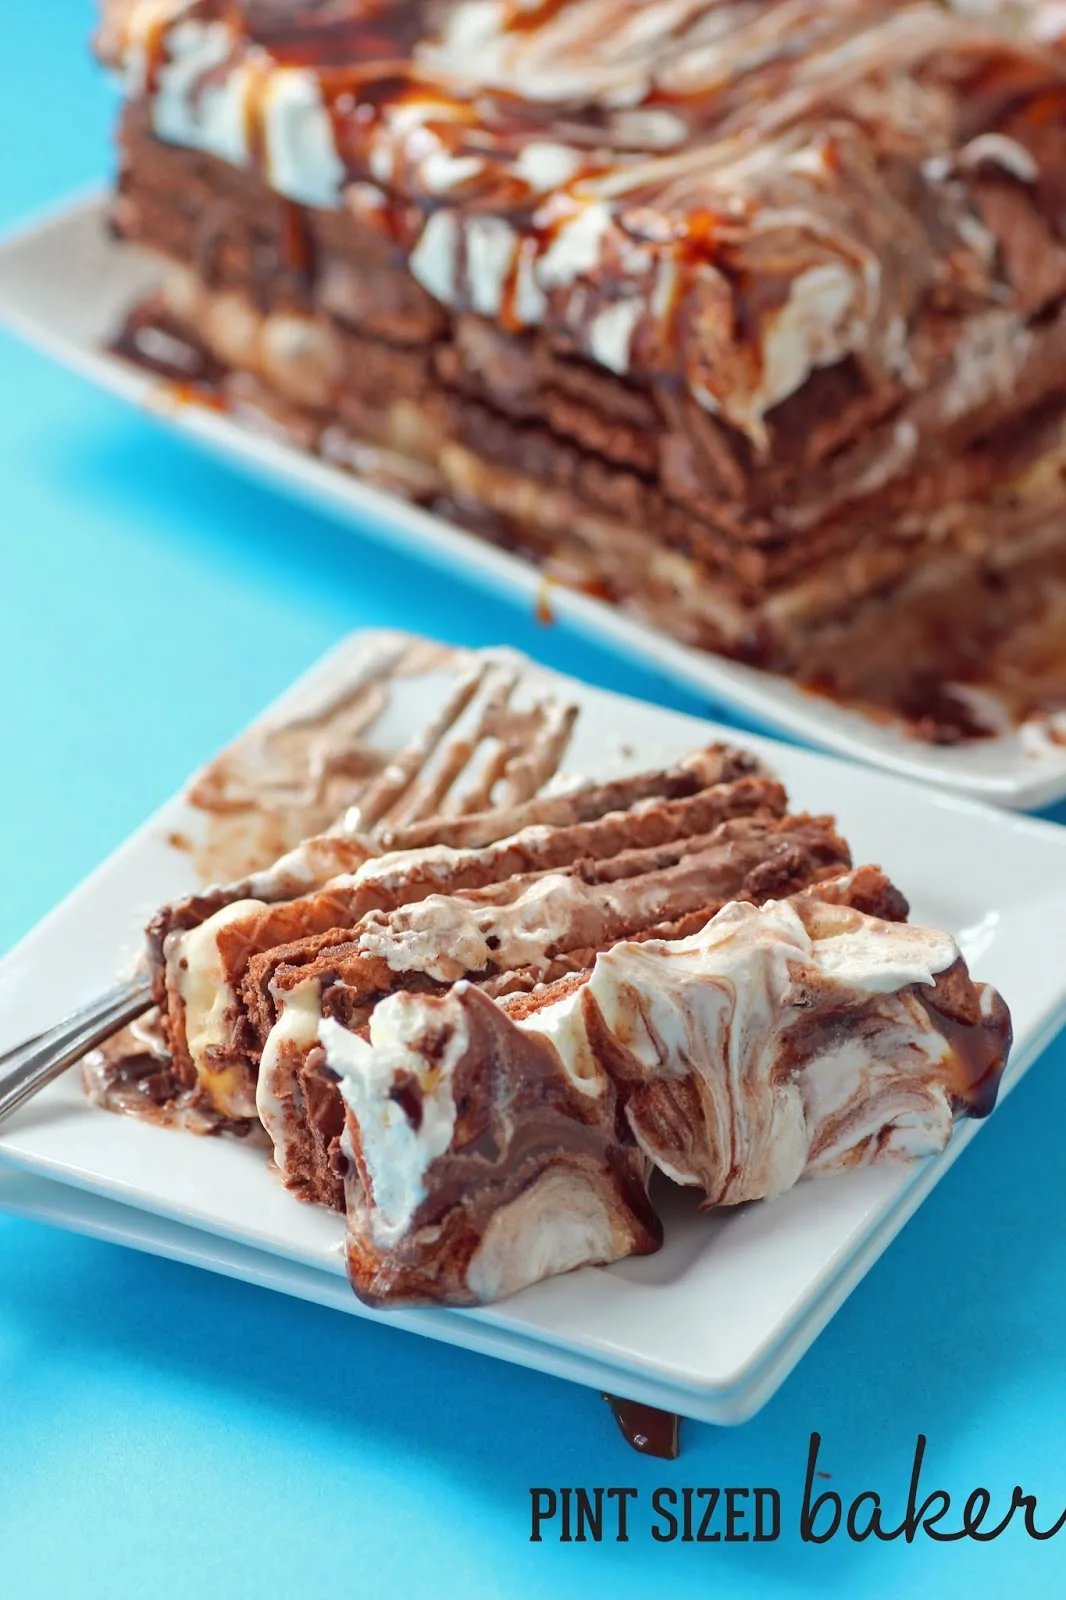 A chocolate wafer icebox cake on a blue background